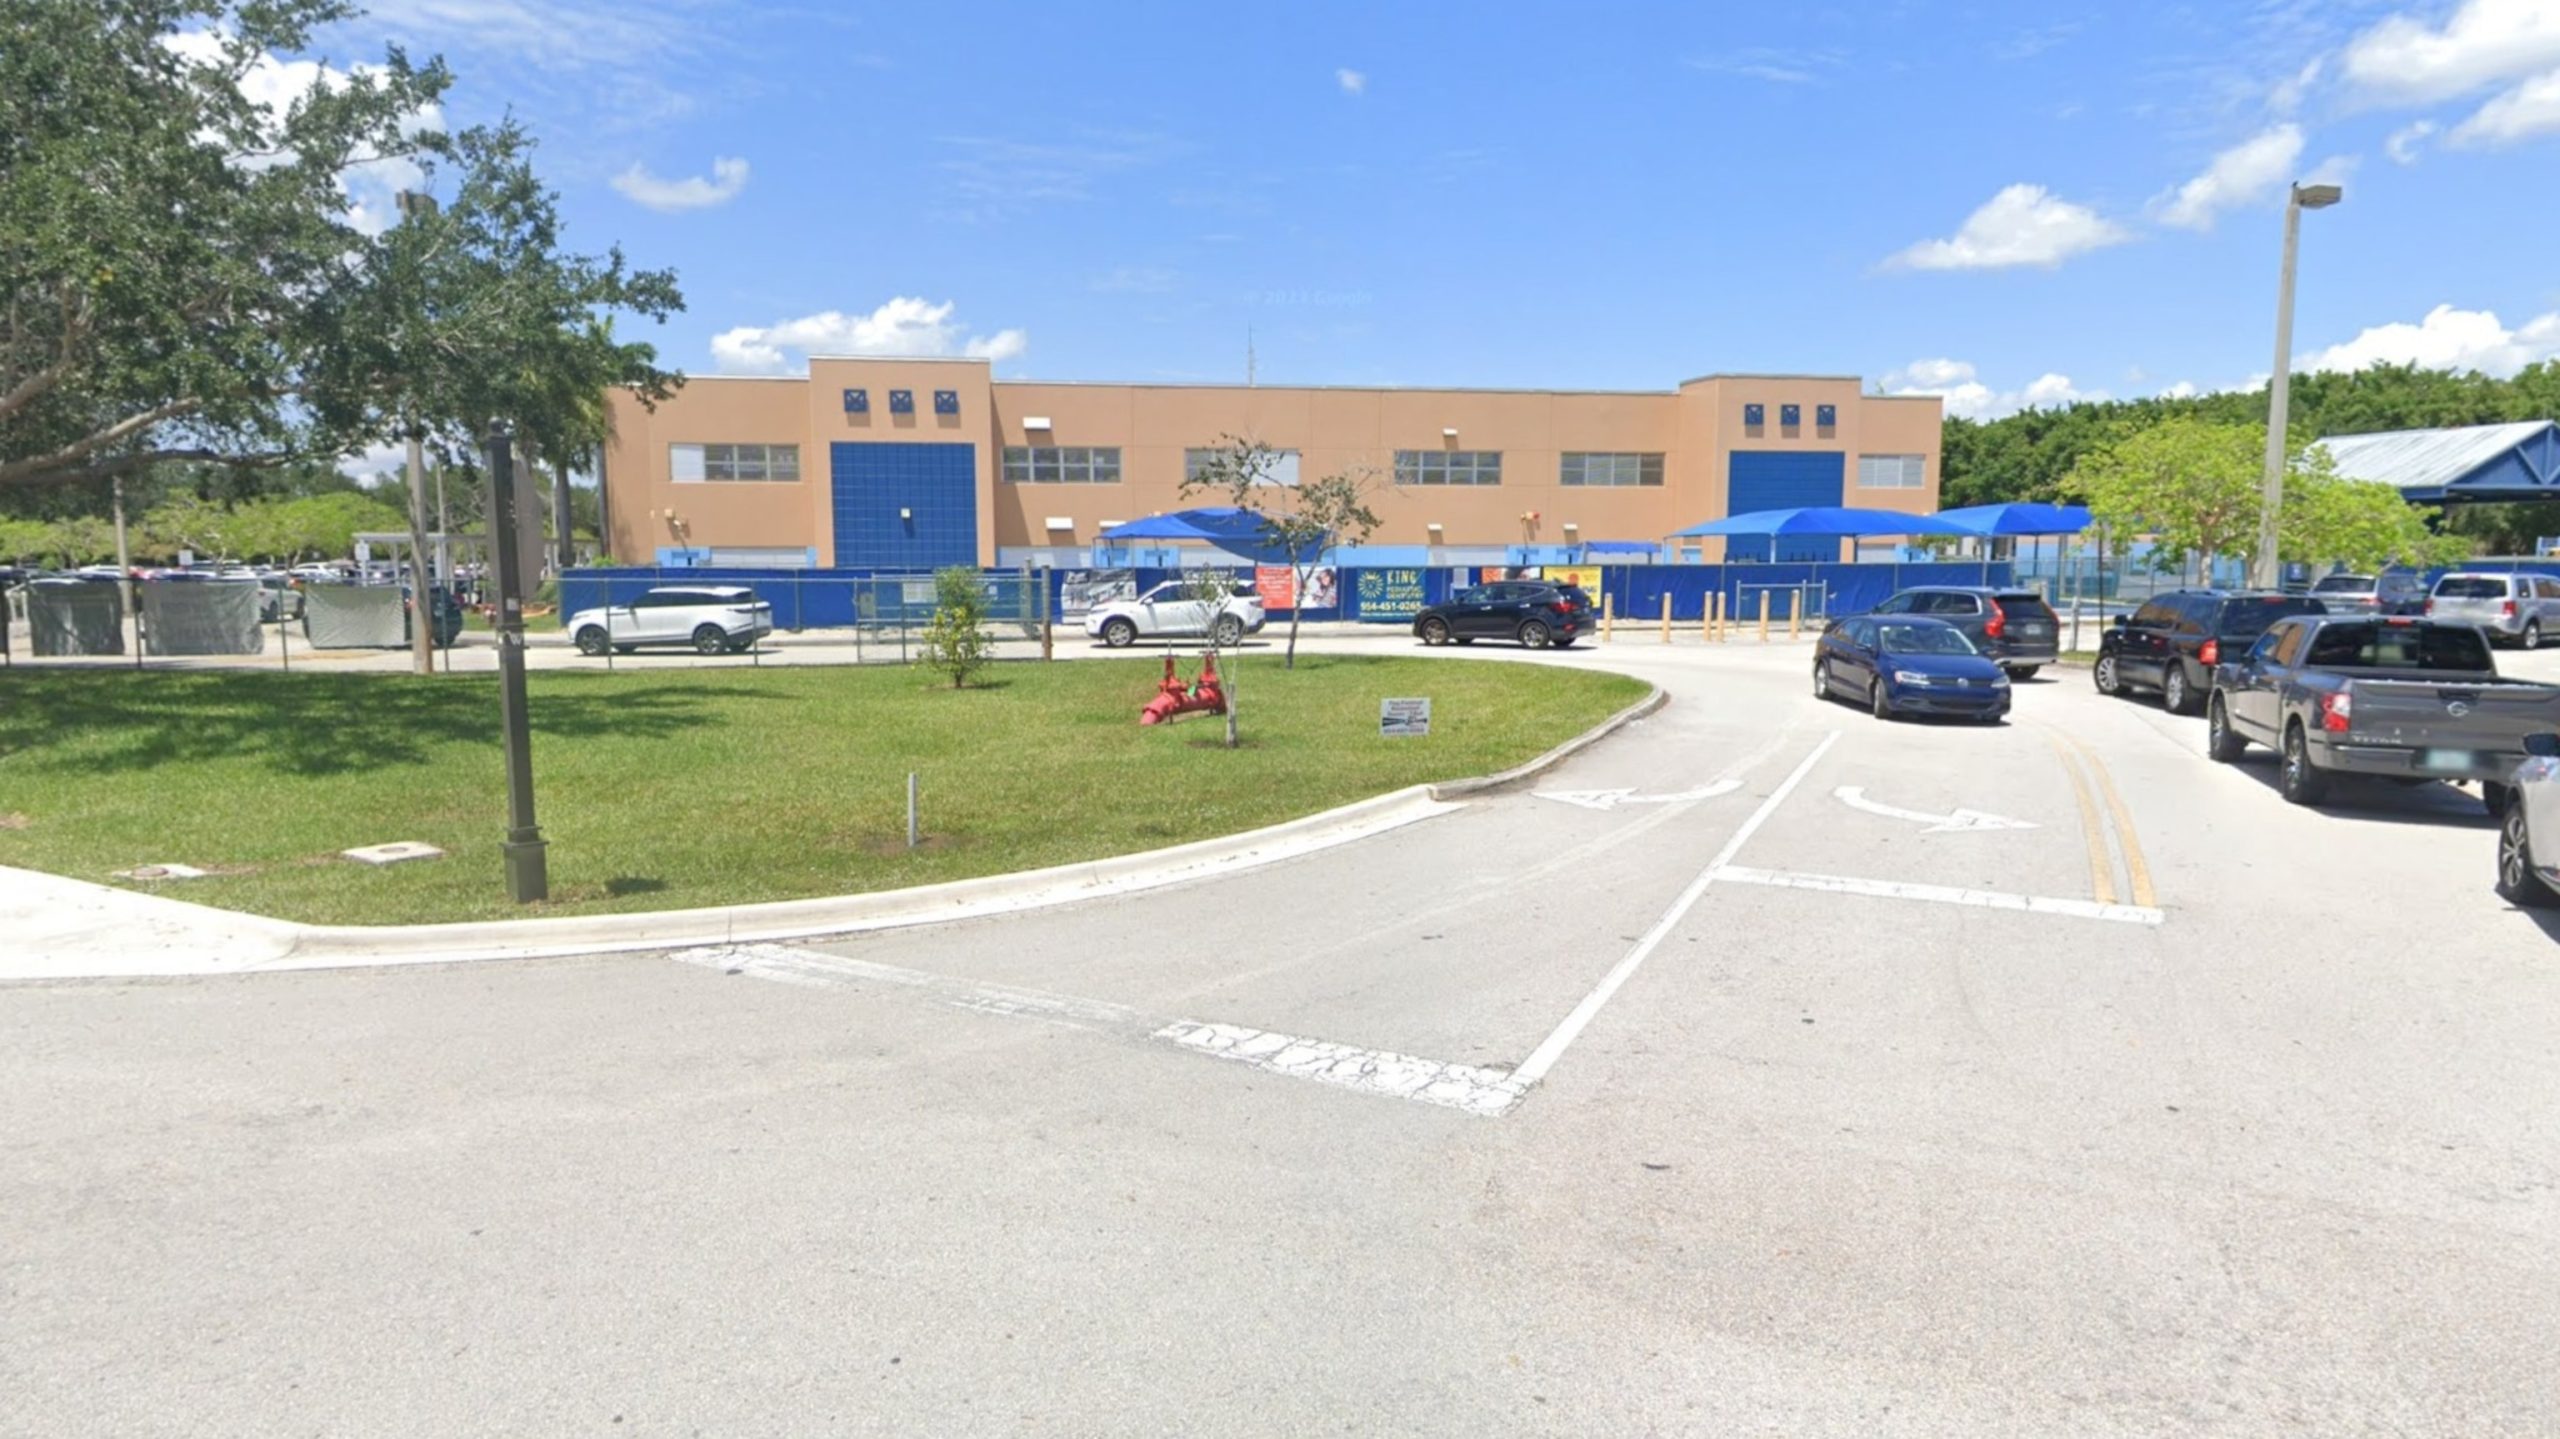 Florida elementary school outbreak now linked to 6th case of measles